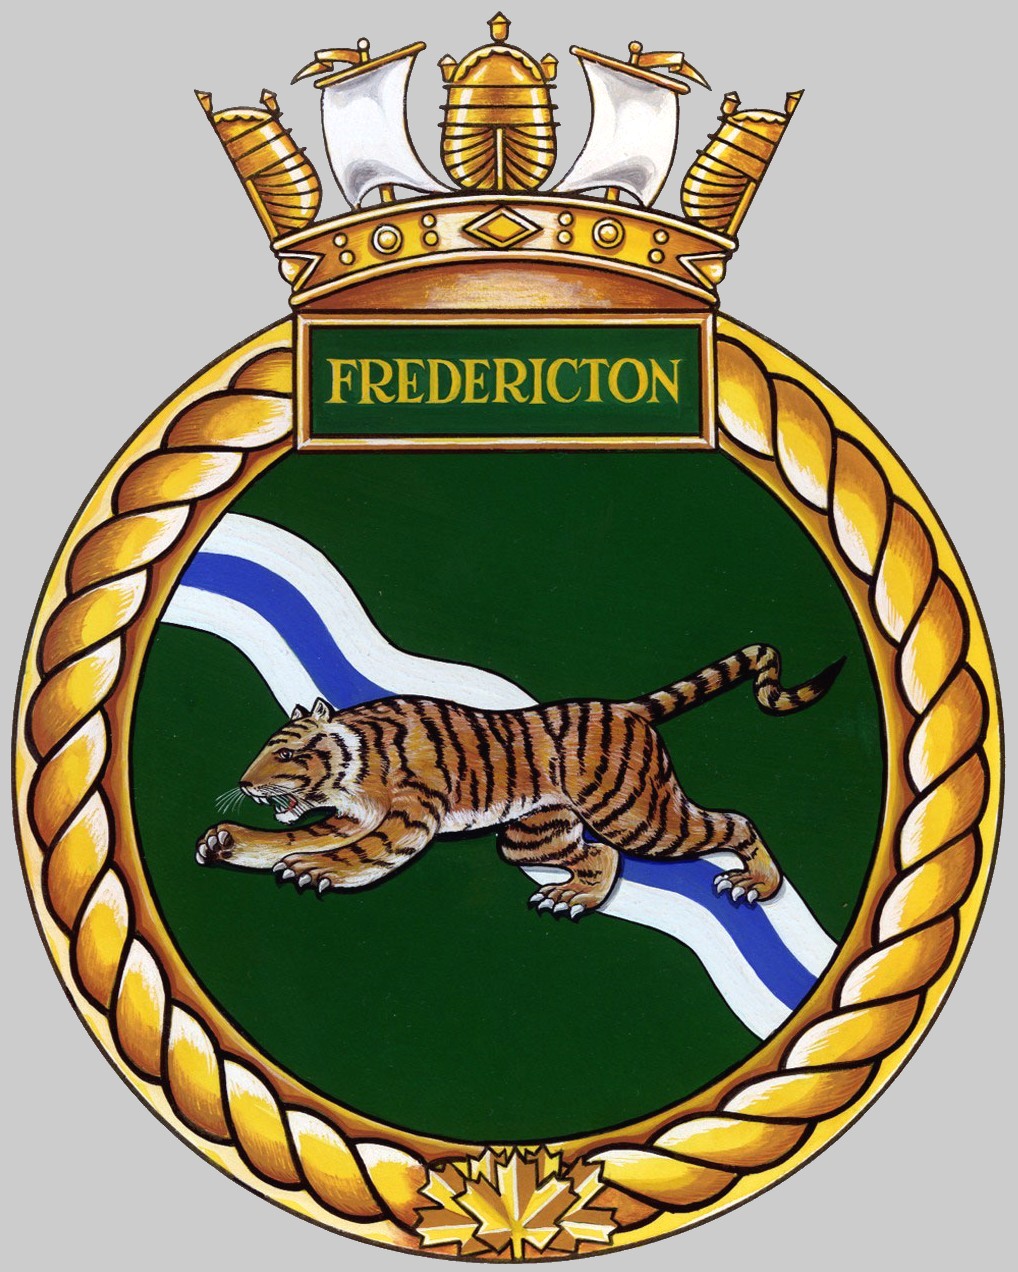 ffh-337 hmcs fredericton crest insignia patch badge halifax class helicopter patrol frigate ncsm royal canadian navy 02c